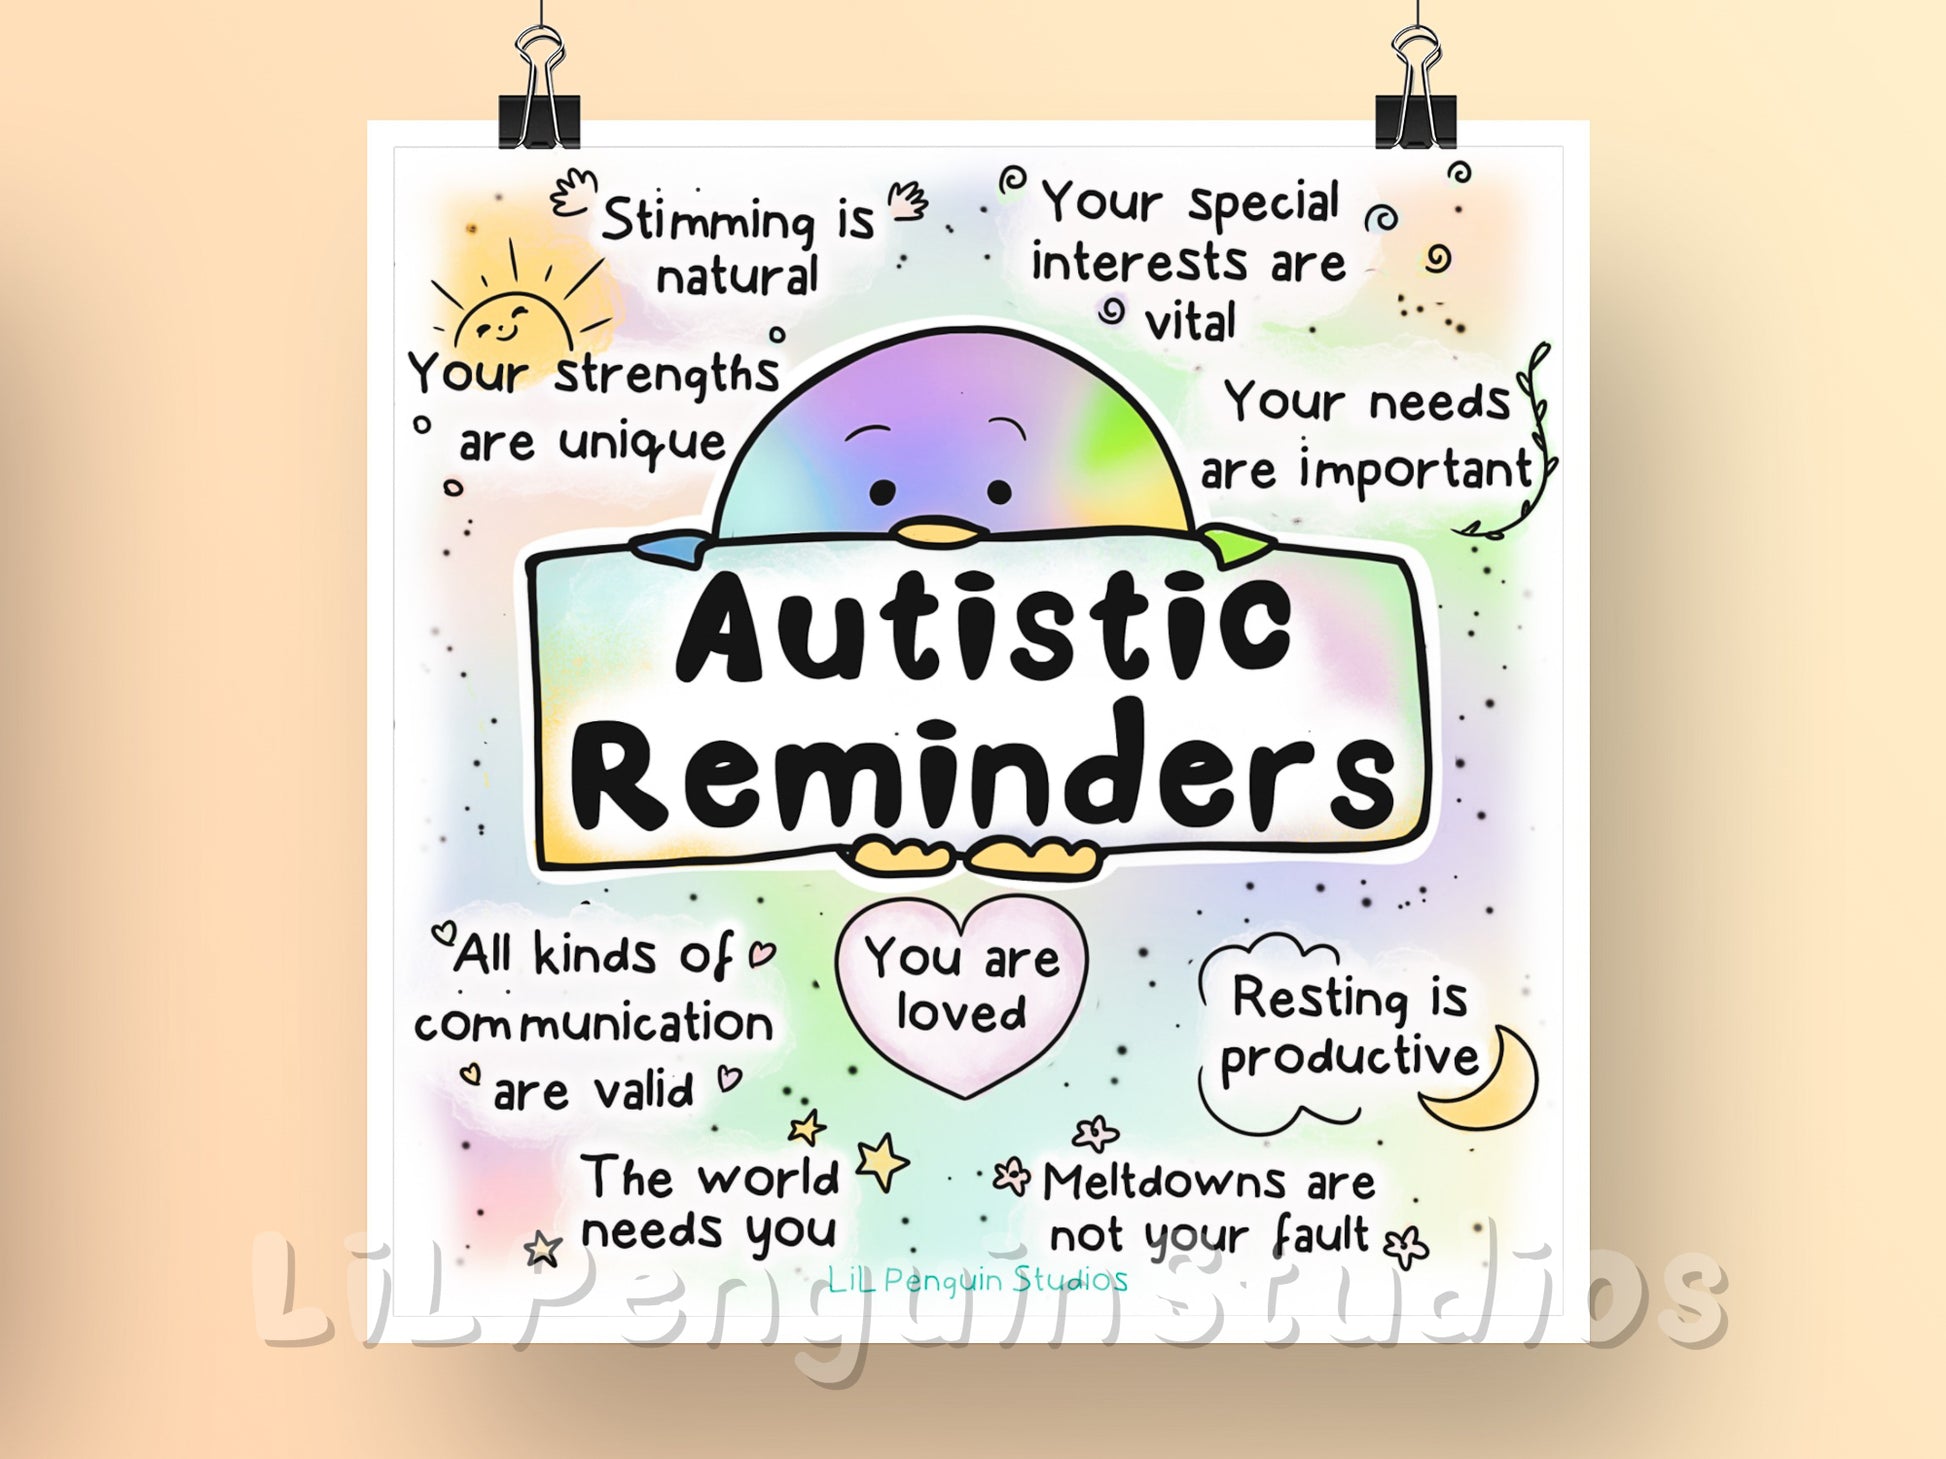 Square Autism Poster (Digital Download only). Autistic reminders. Stimming is natural Your special interests are vital Your strengths are unique Your needs are important All kinds of communication are valid Resting is productive Meltdowns are not your fault You are loved The world needs you